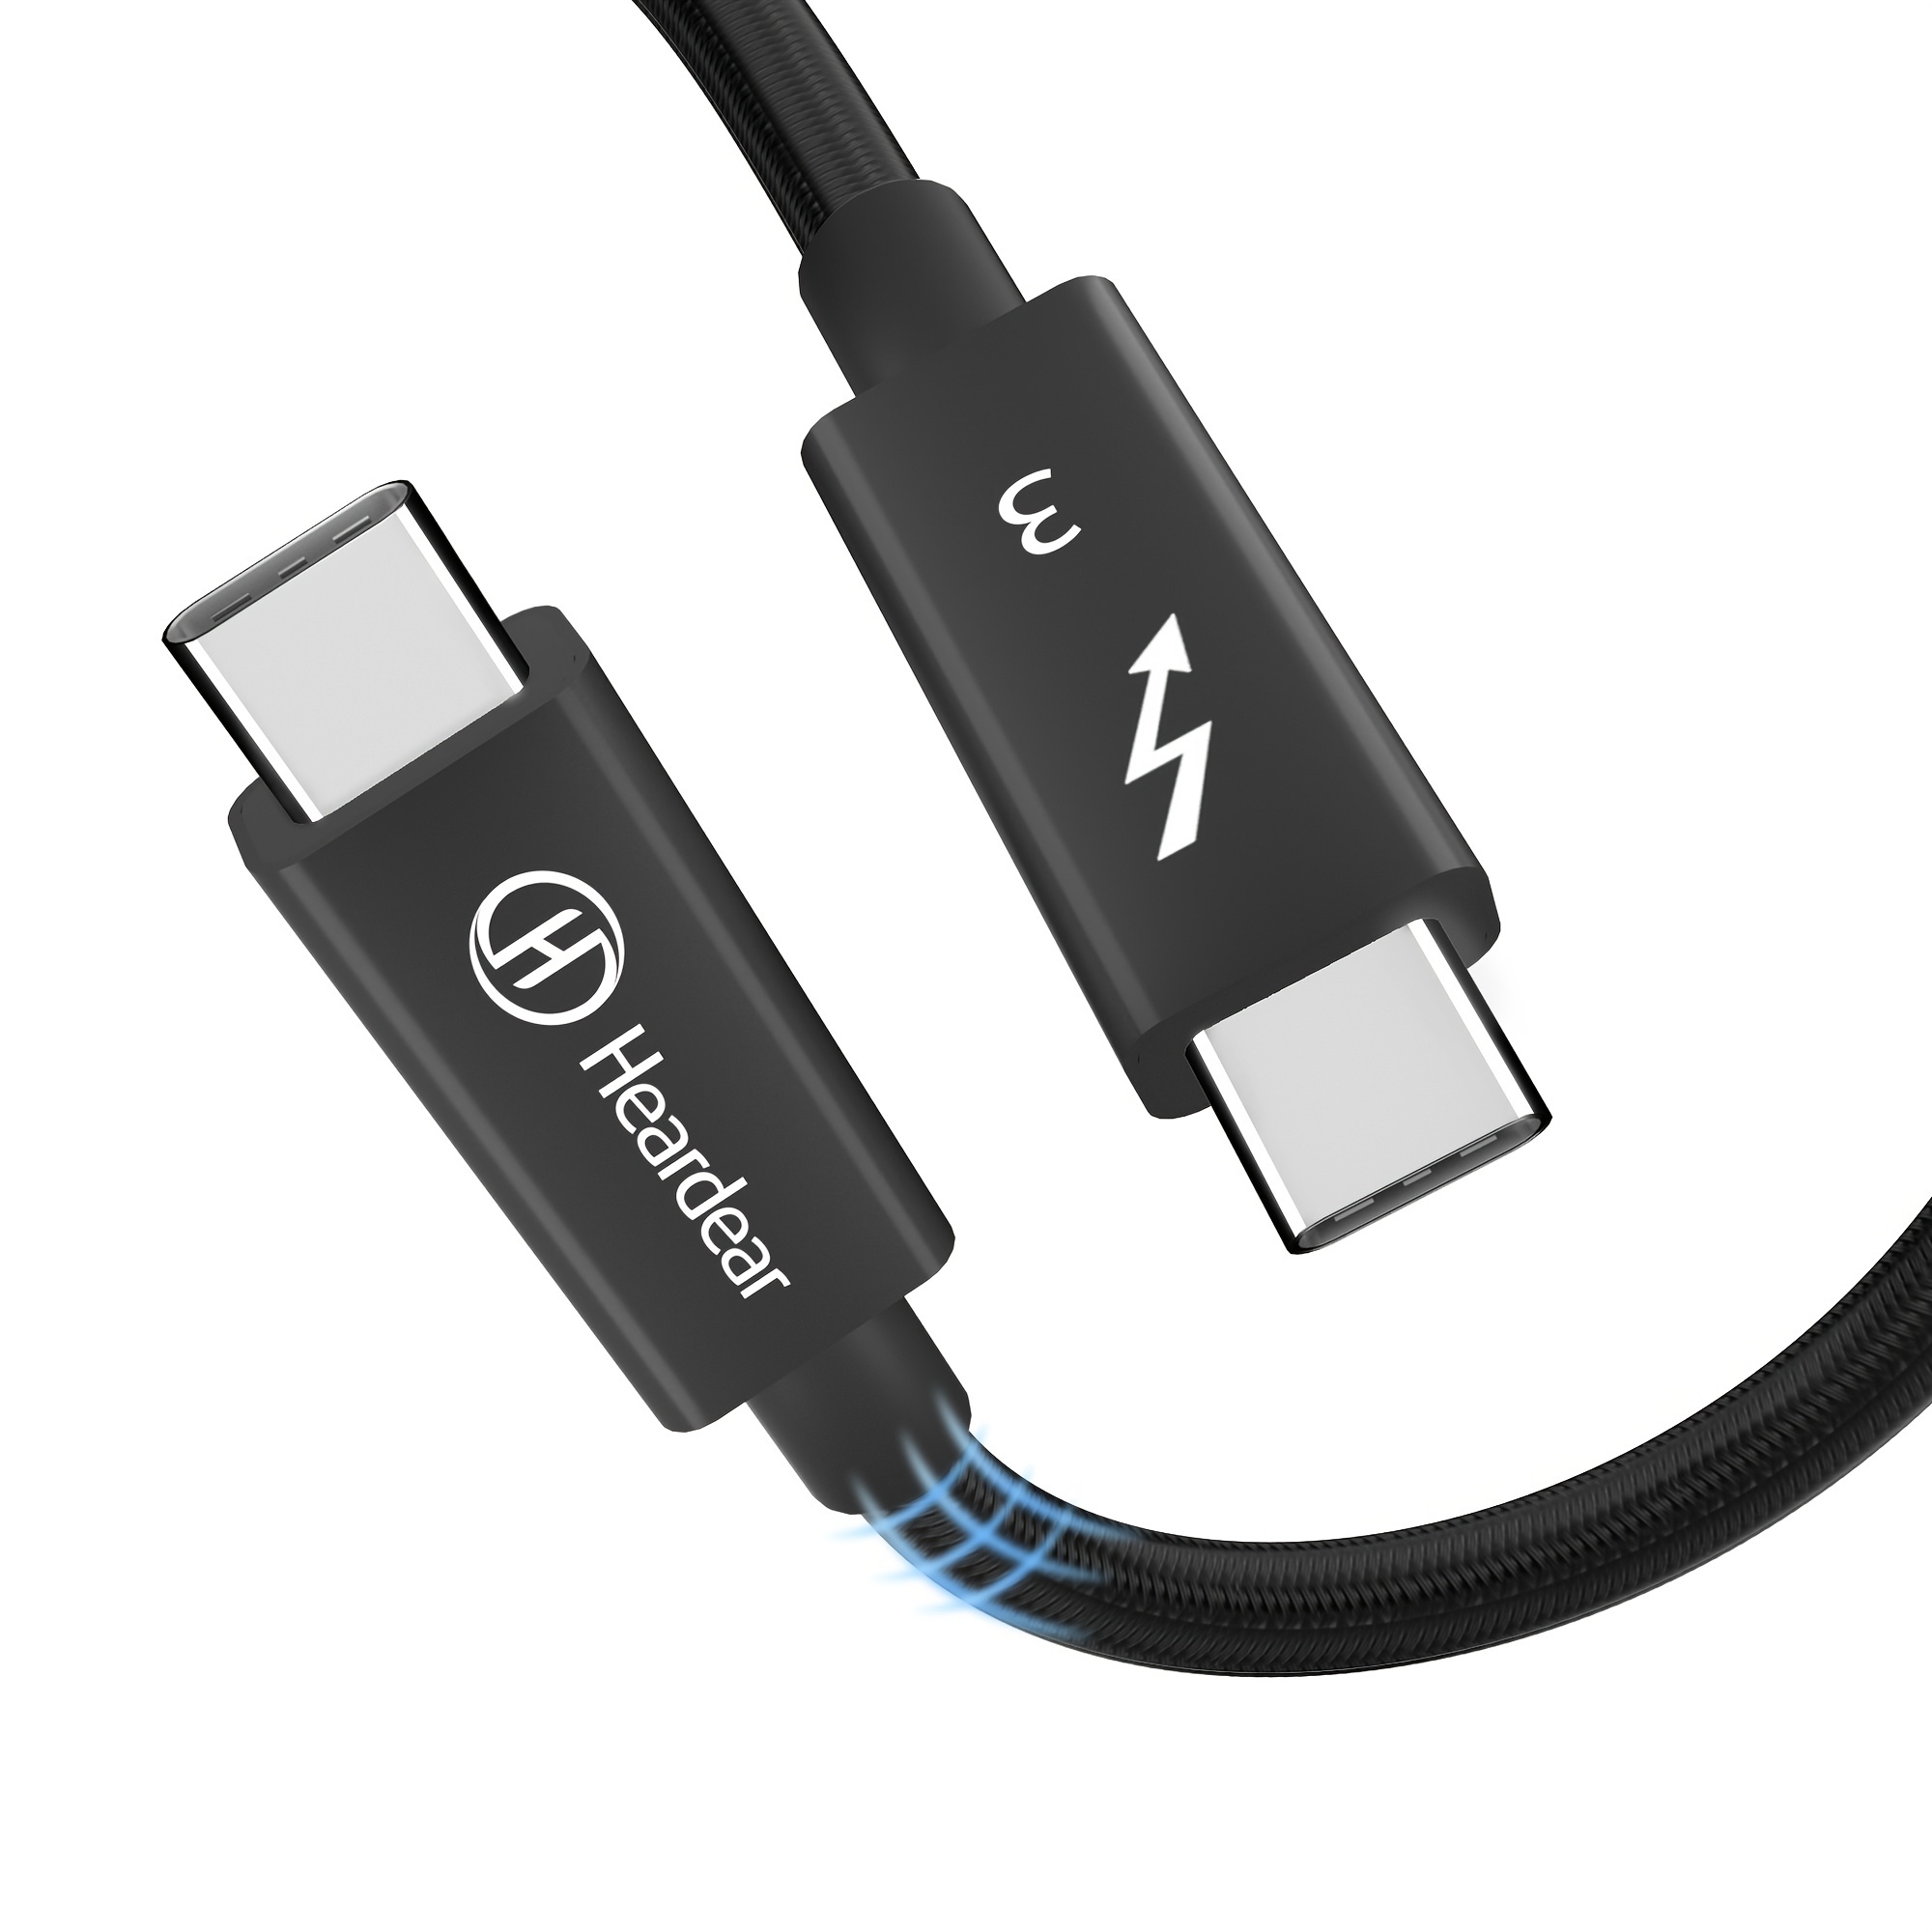 6ft Thunderbolt 4 Cable, 40Gbps, 100W - Thunderbolt 4 and